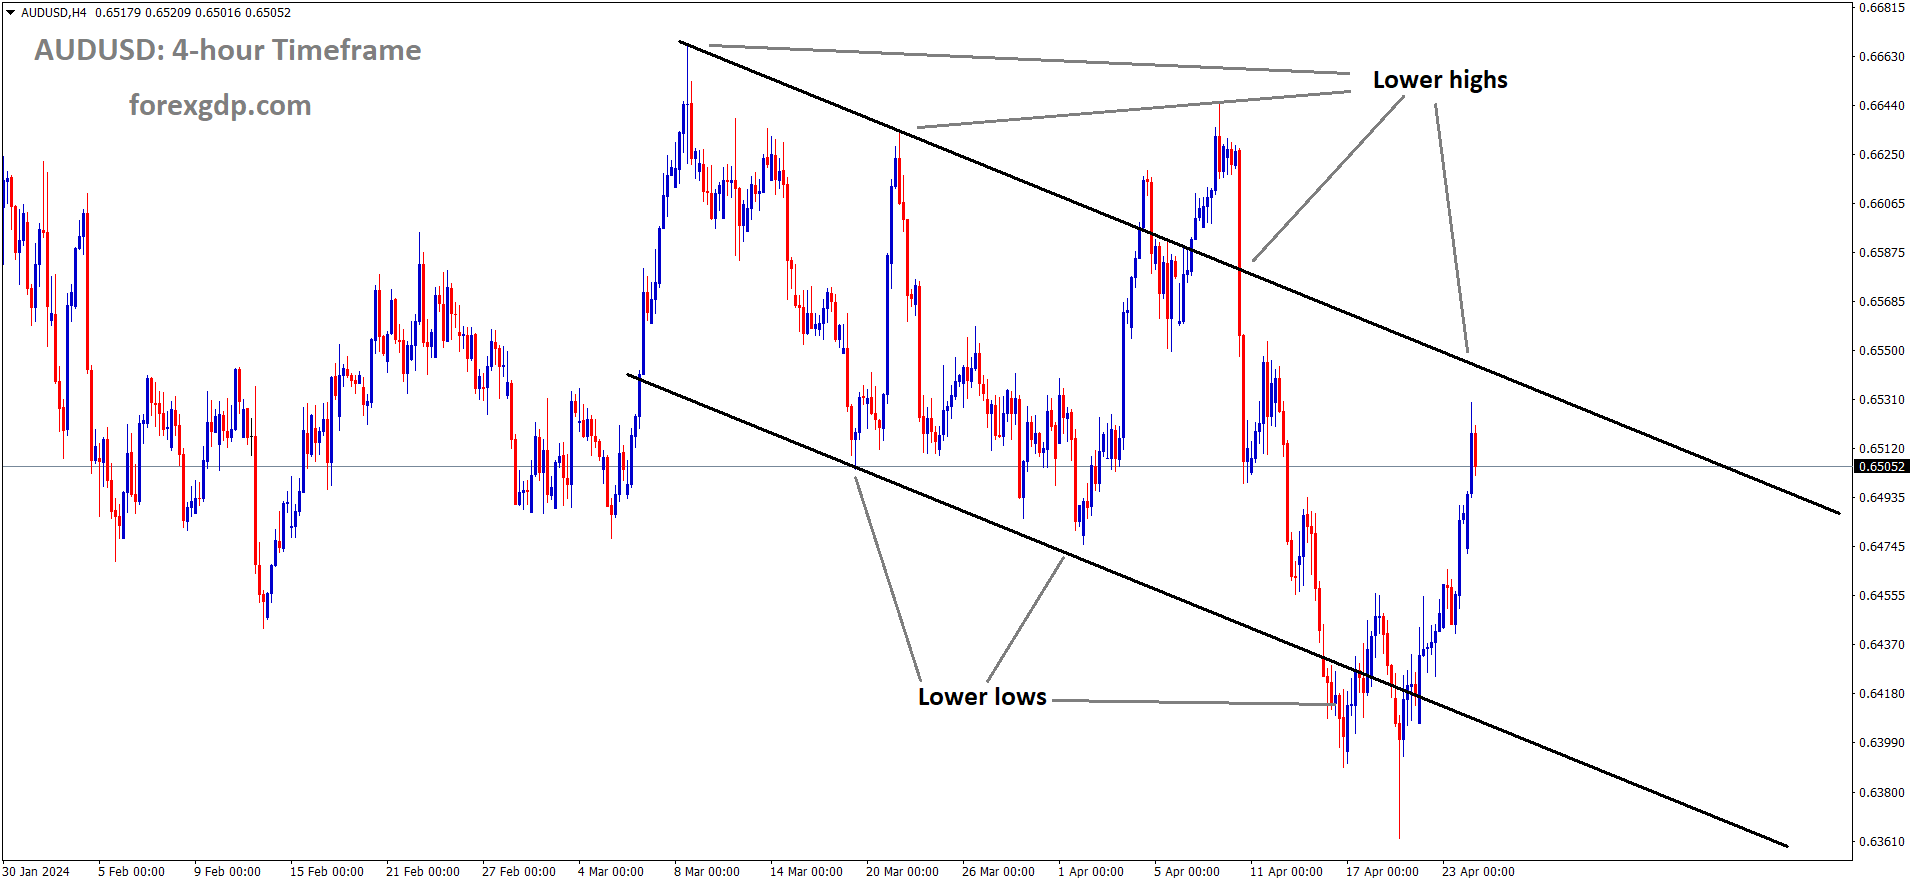 AUDUSD is moving in the Descending channel and the market has reached the lower high area of the channel